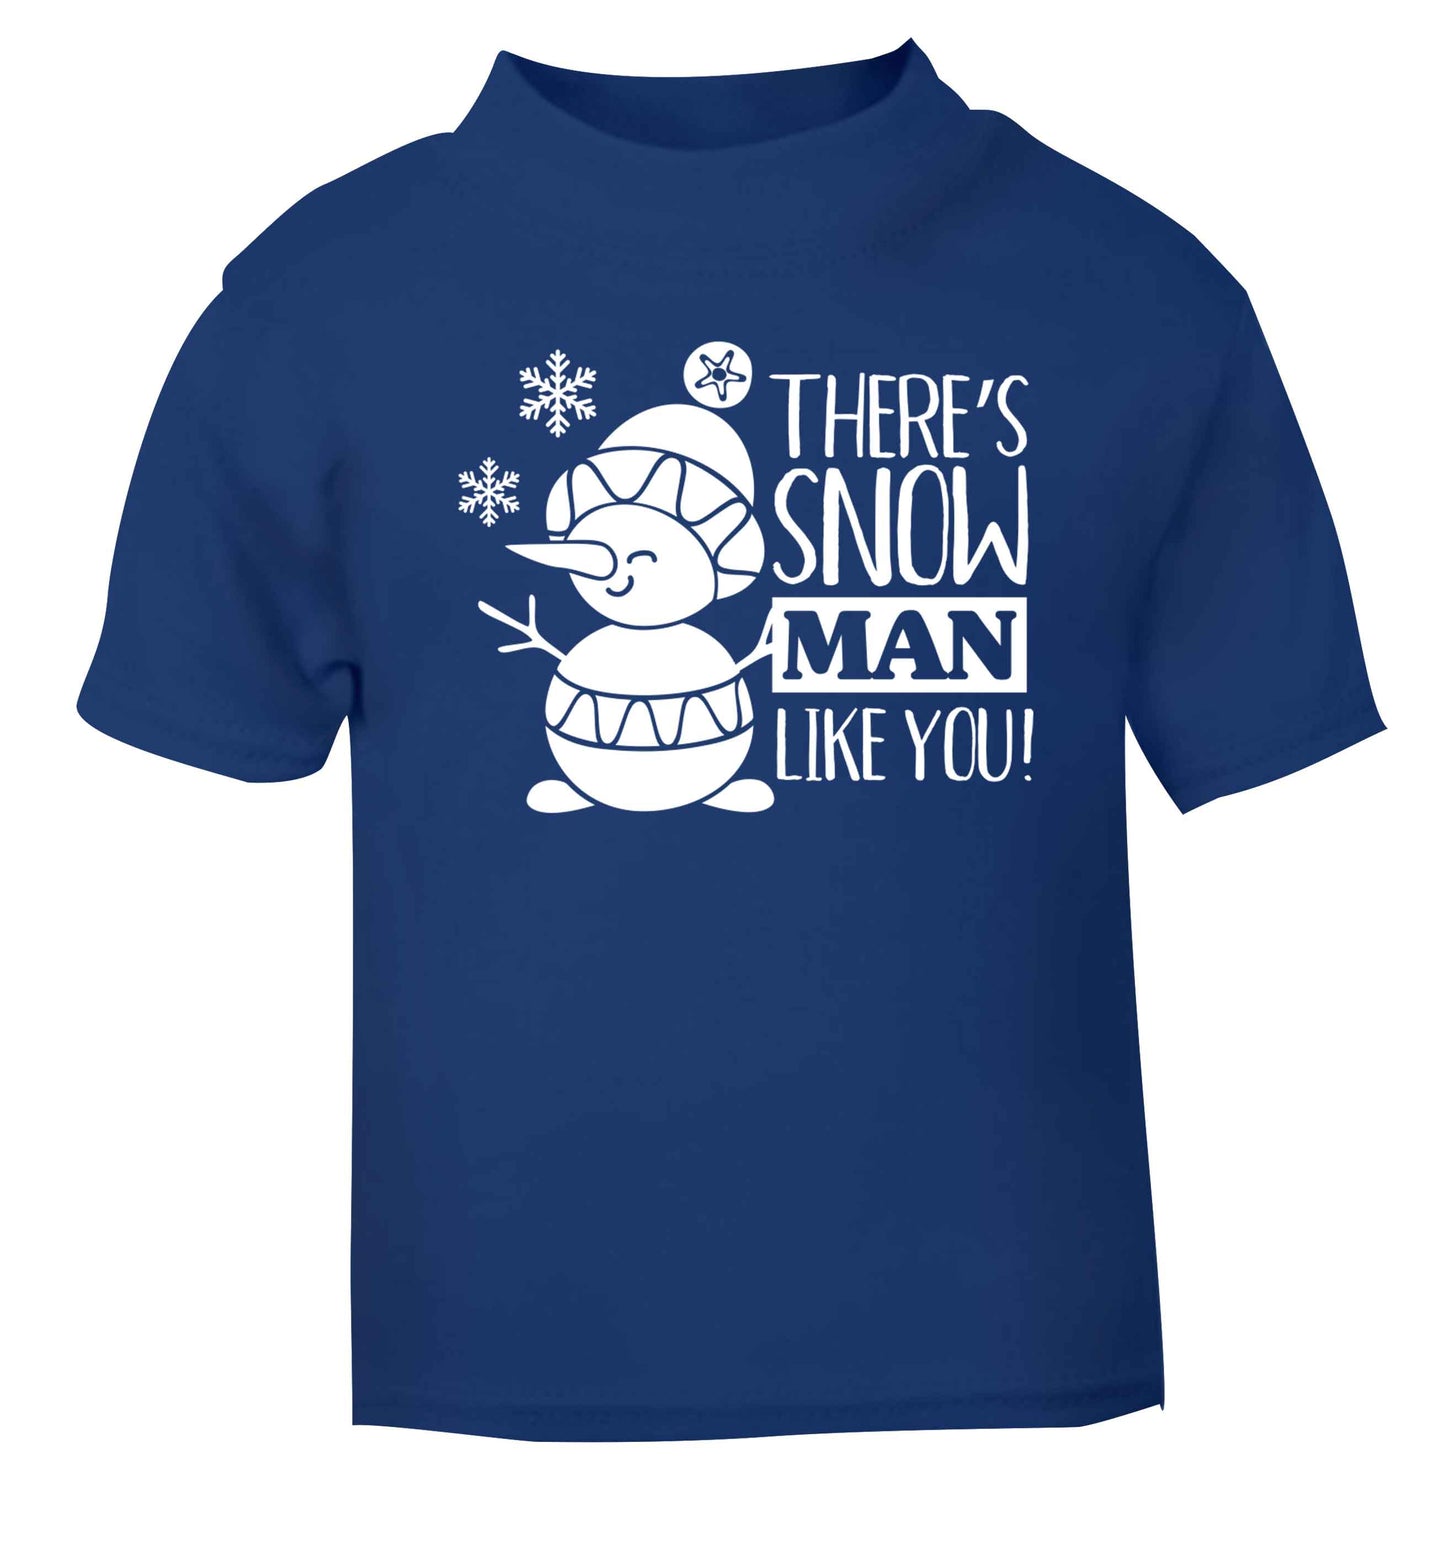 There's snow man like you blue baby toddler Tshirt 2 Years